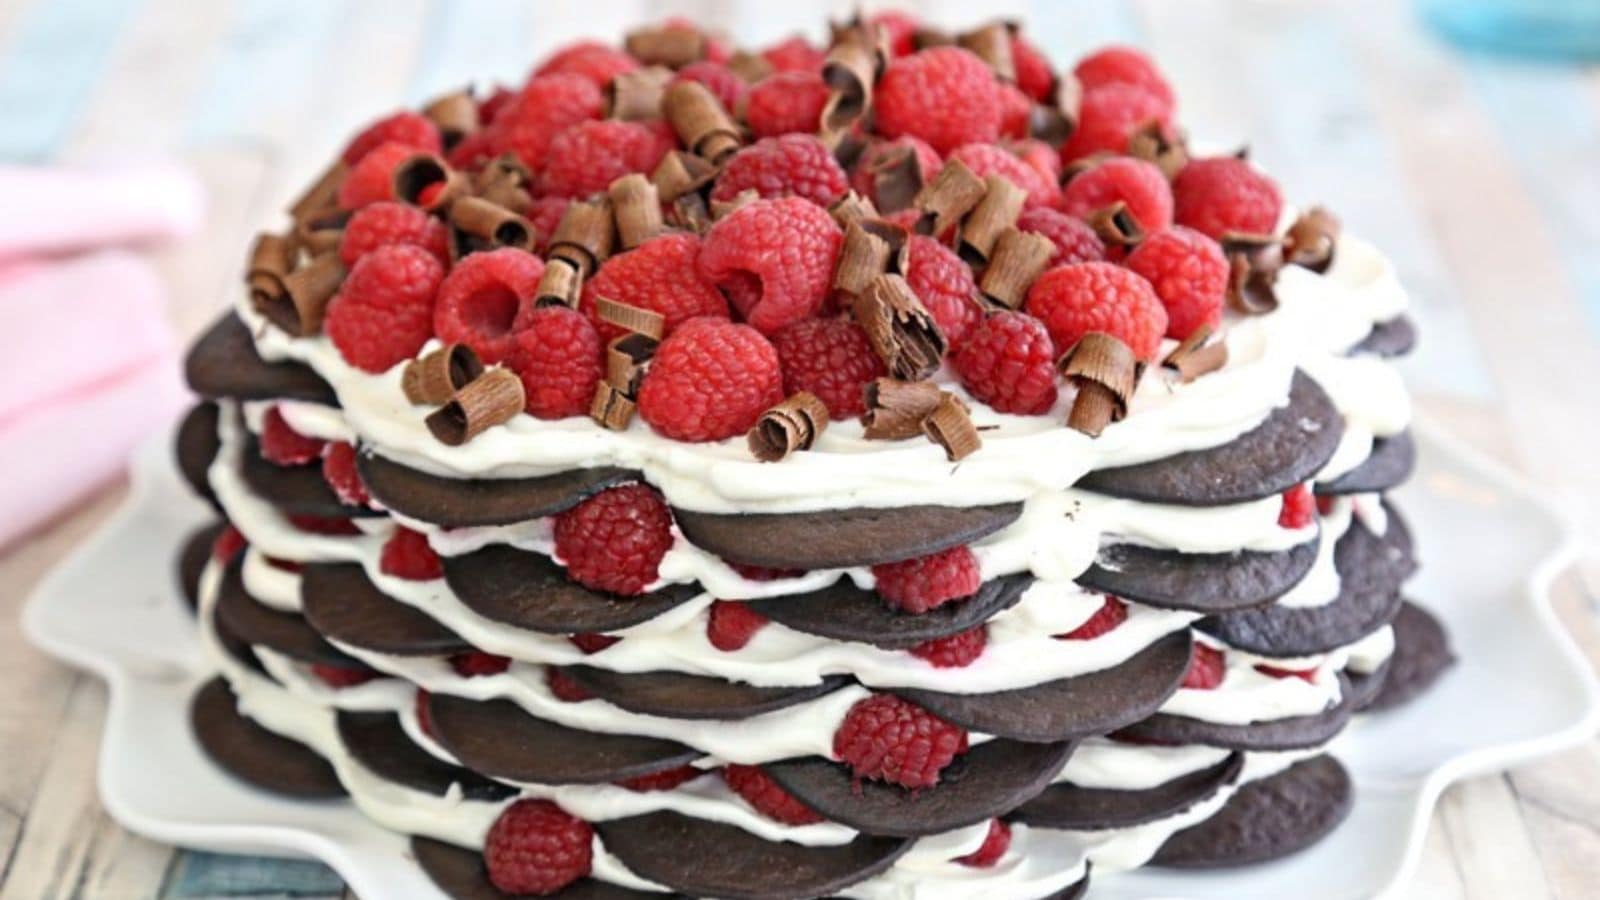 Layers of chocolate cookies, raspberries, and whipped cream.